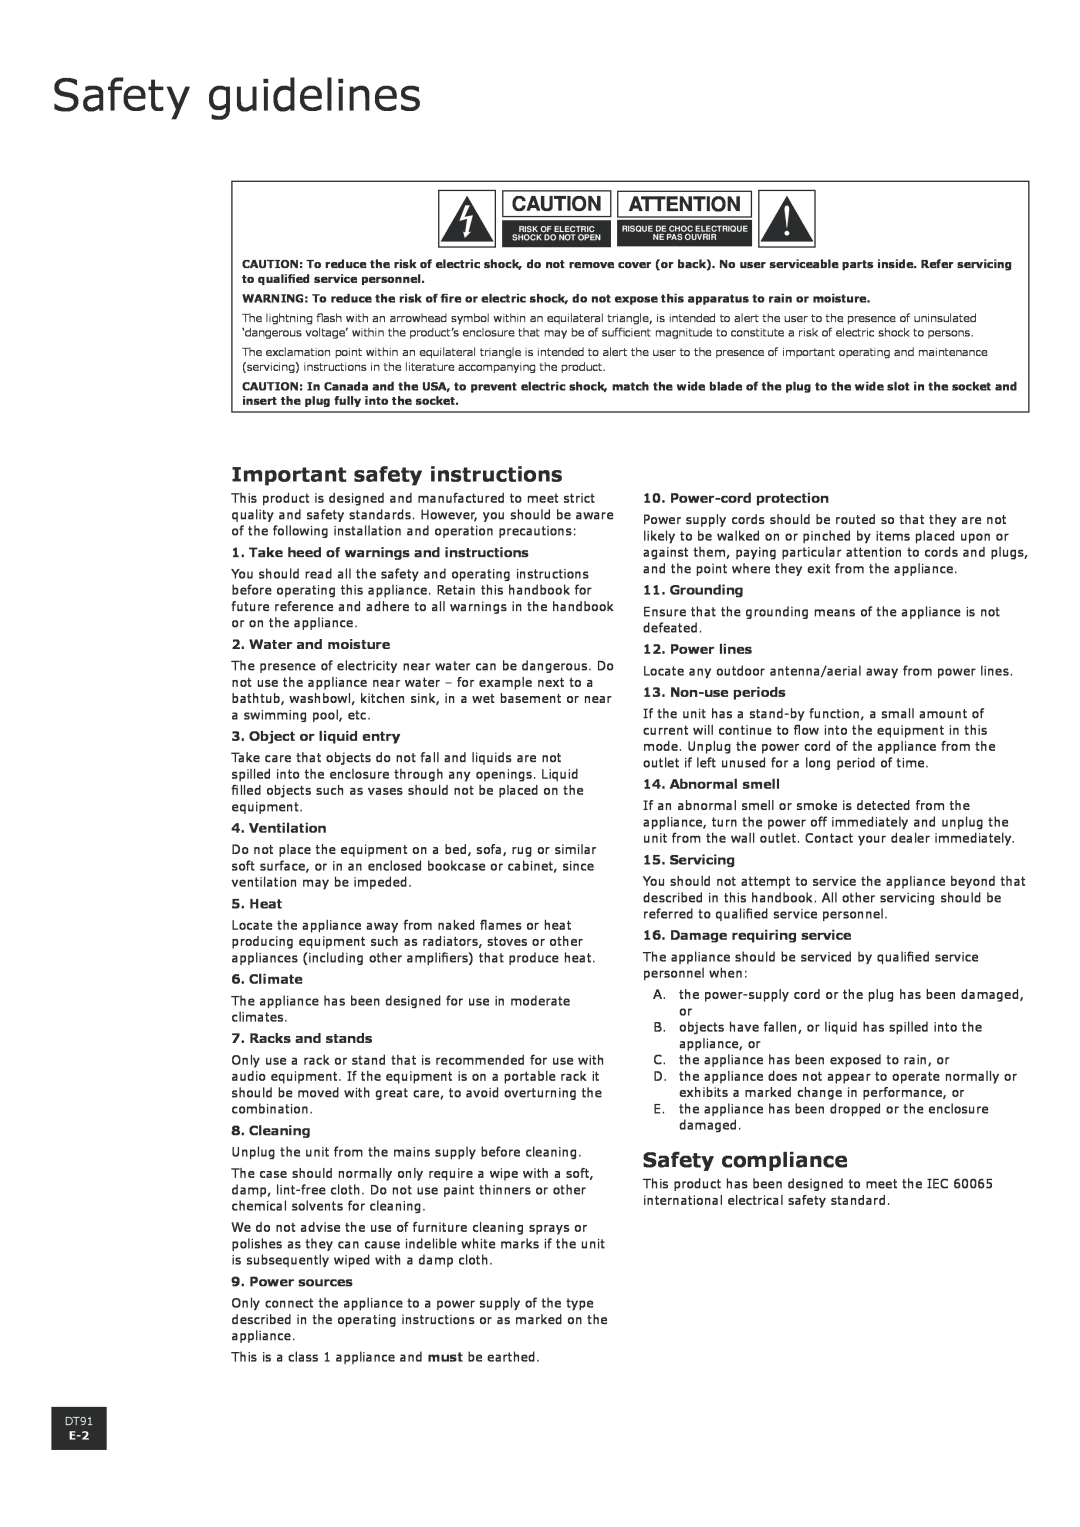 Arcam DT91 Safety guidelines, Important safety instructions, Safety compliance, Take heed of warnings and instructions 